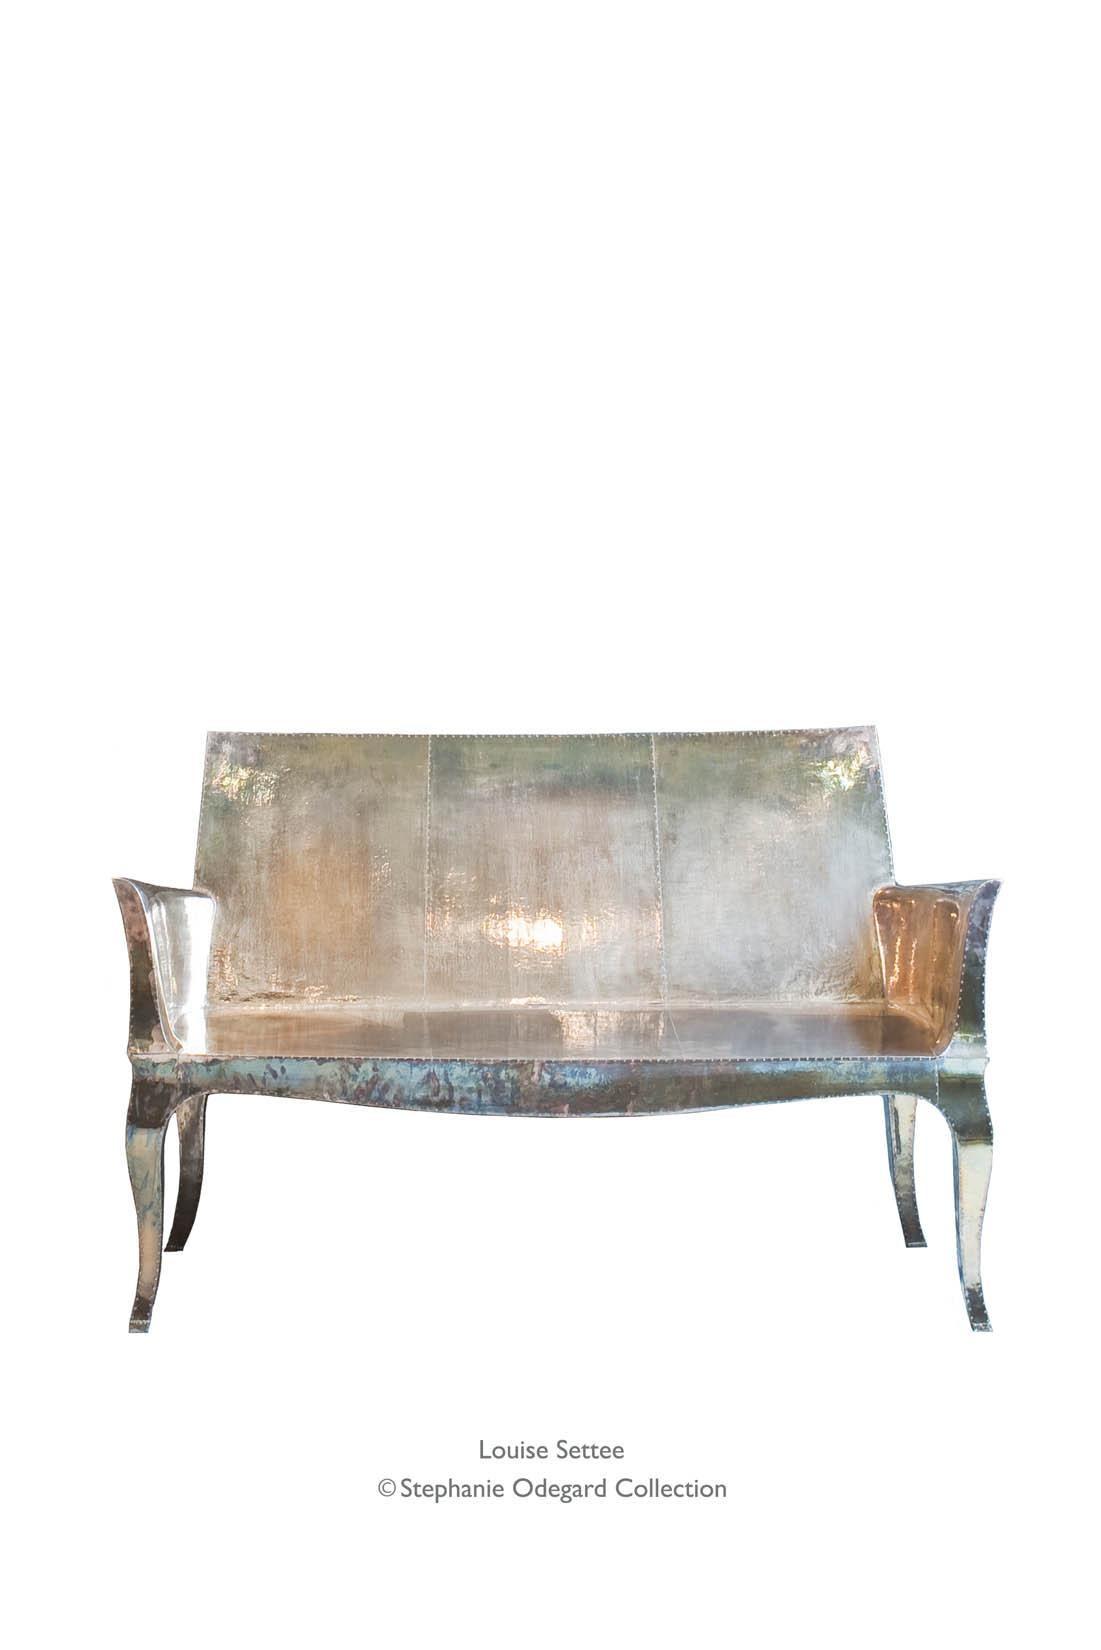 Louise Settee Art Deco Canapes in Mid. Hammered Copper by Paul Mathieu For Sale 6